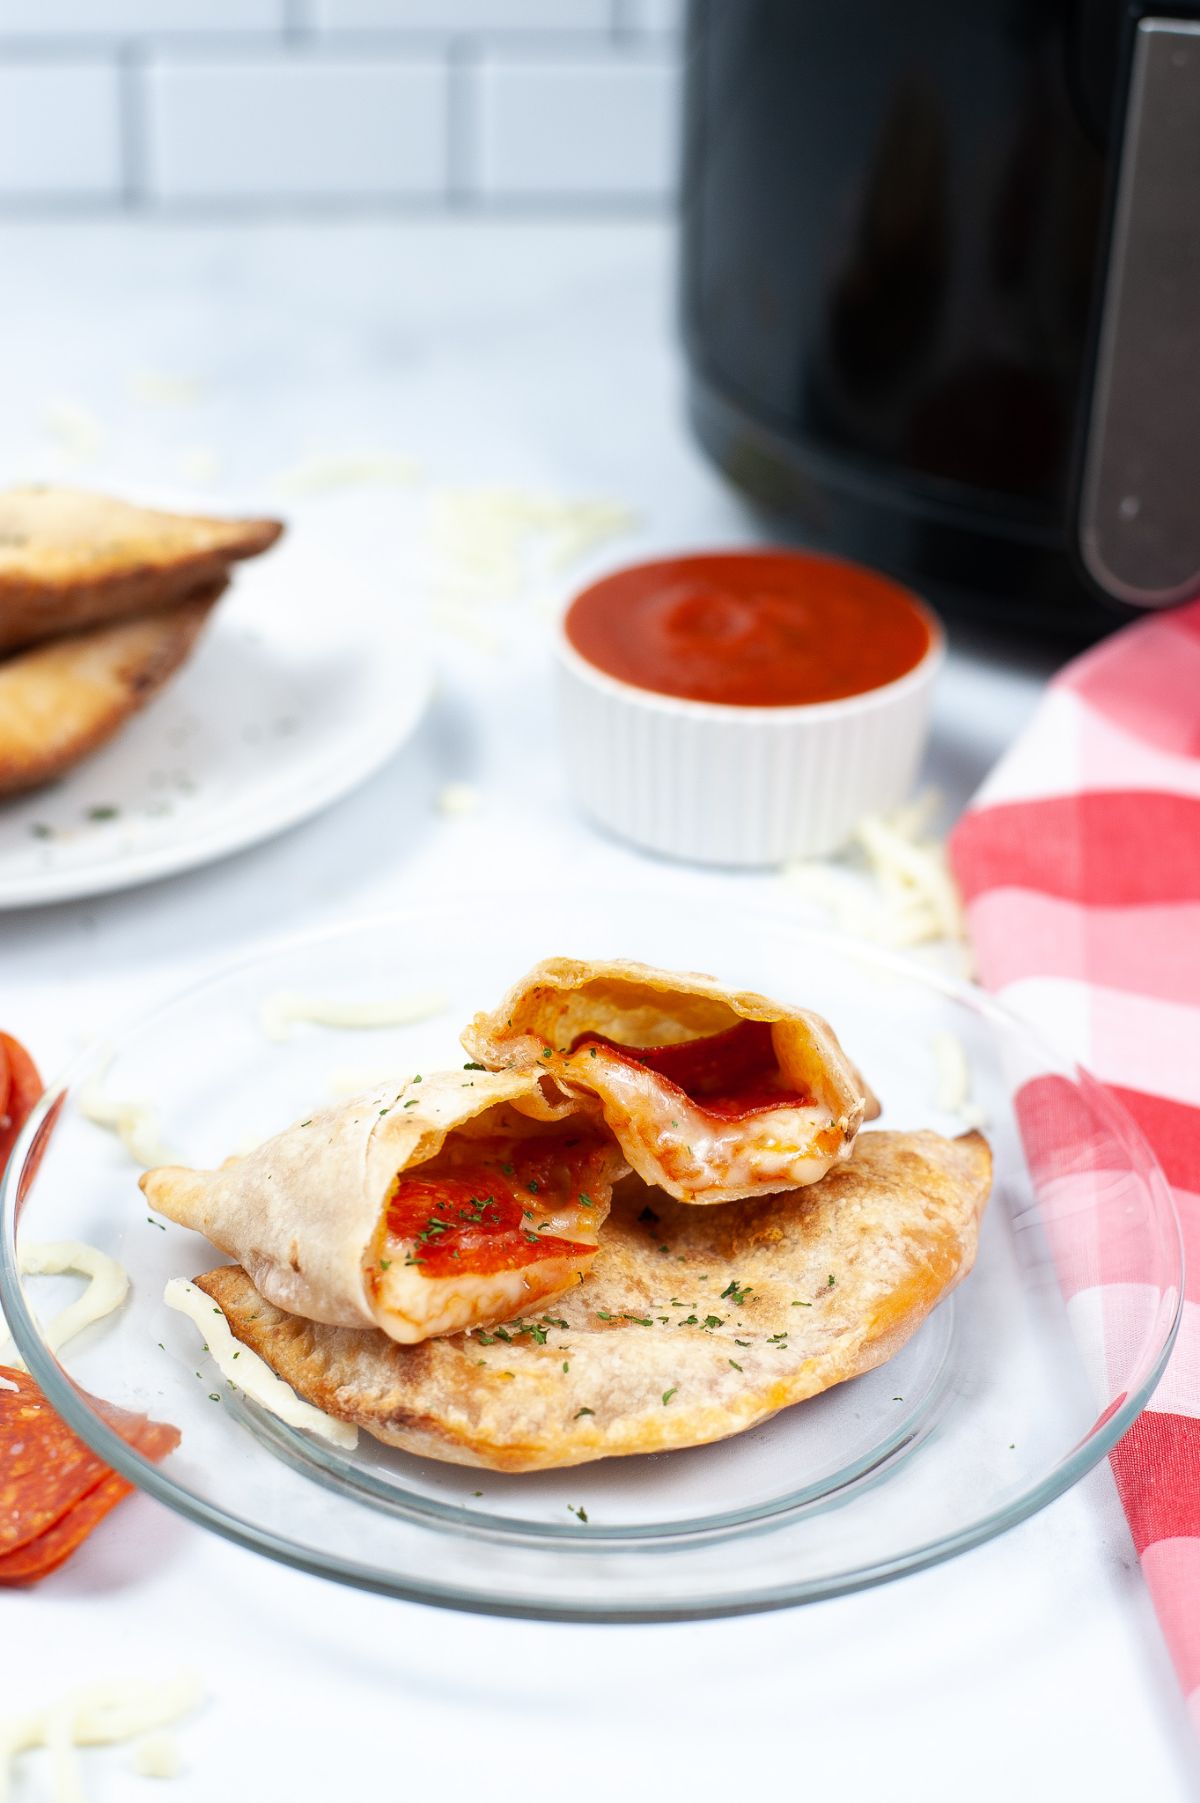 A serving of 2 pieces of Air Fryer Calzone where one is halved on top of the other piece showcasing the melted cheese filling.